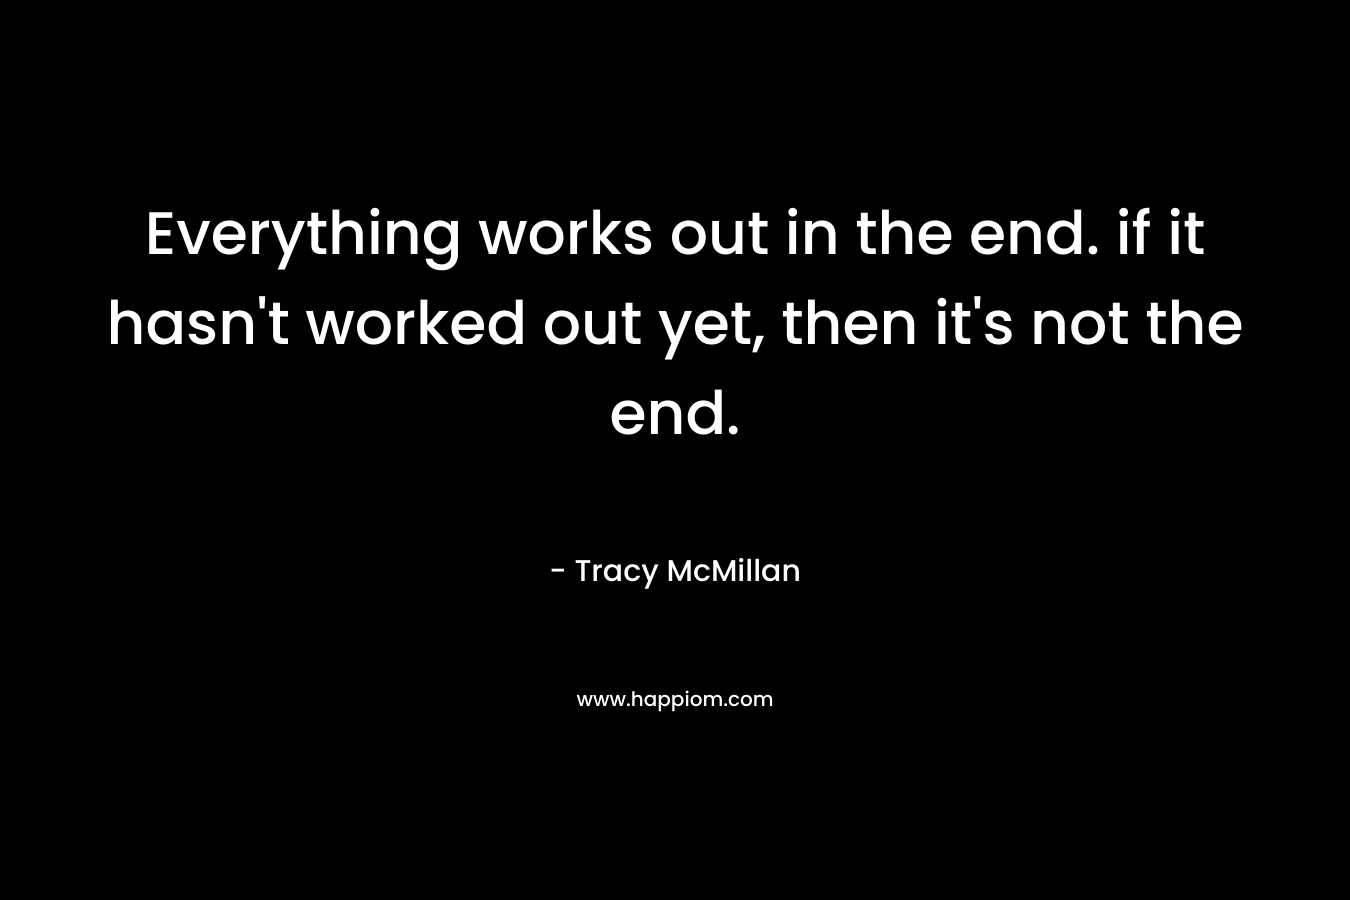 Everything works out in the end. if it hasn’t worked out yet, then it’s not the end. – Tracy McMillan